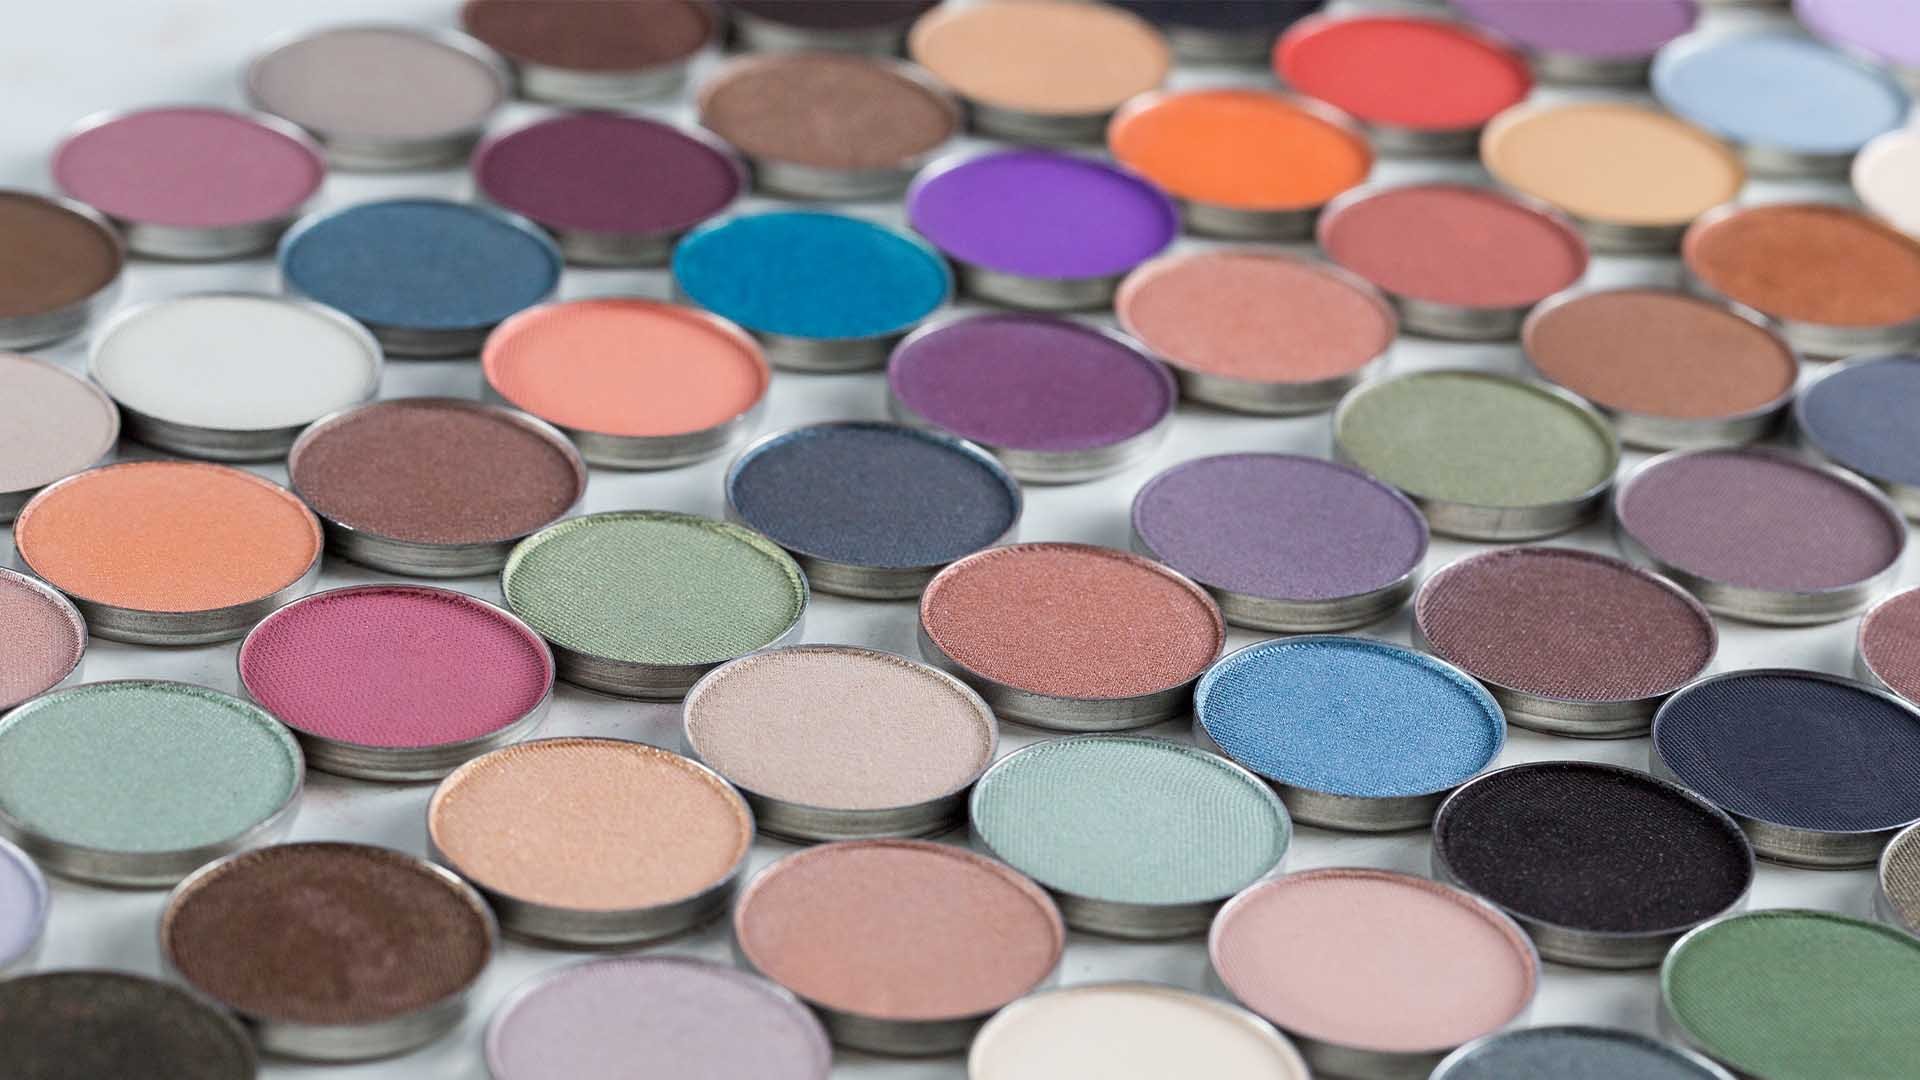 Loreal Paris Article Your Guide to Depotting Eyeshadow D